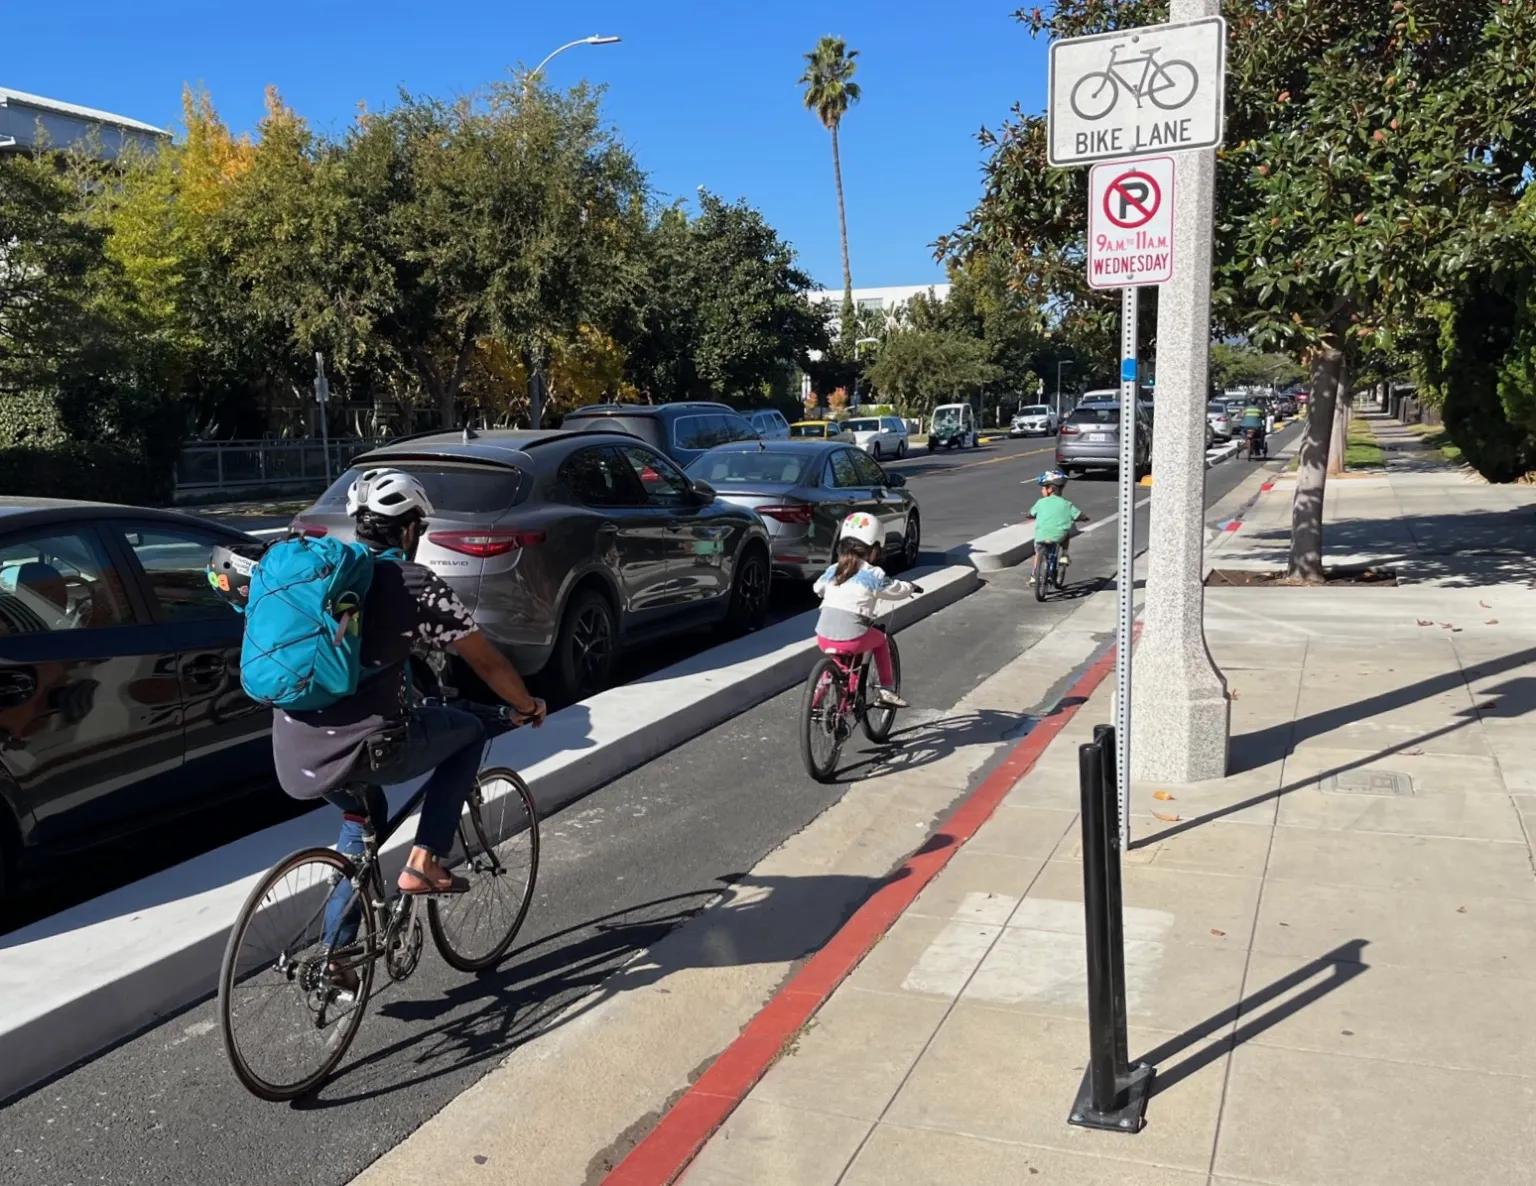 Protected bike lane (low concrete barriers) with two kids and an adult cycling